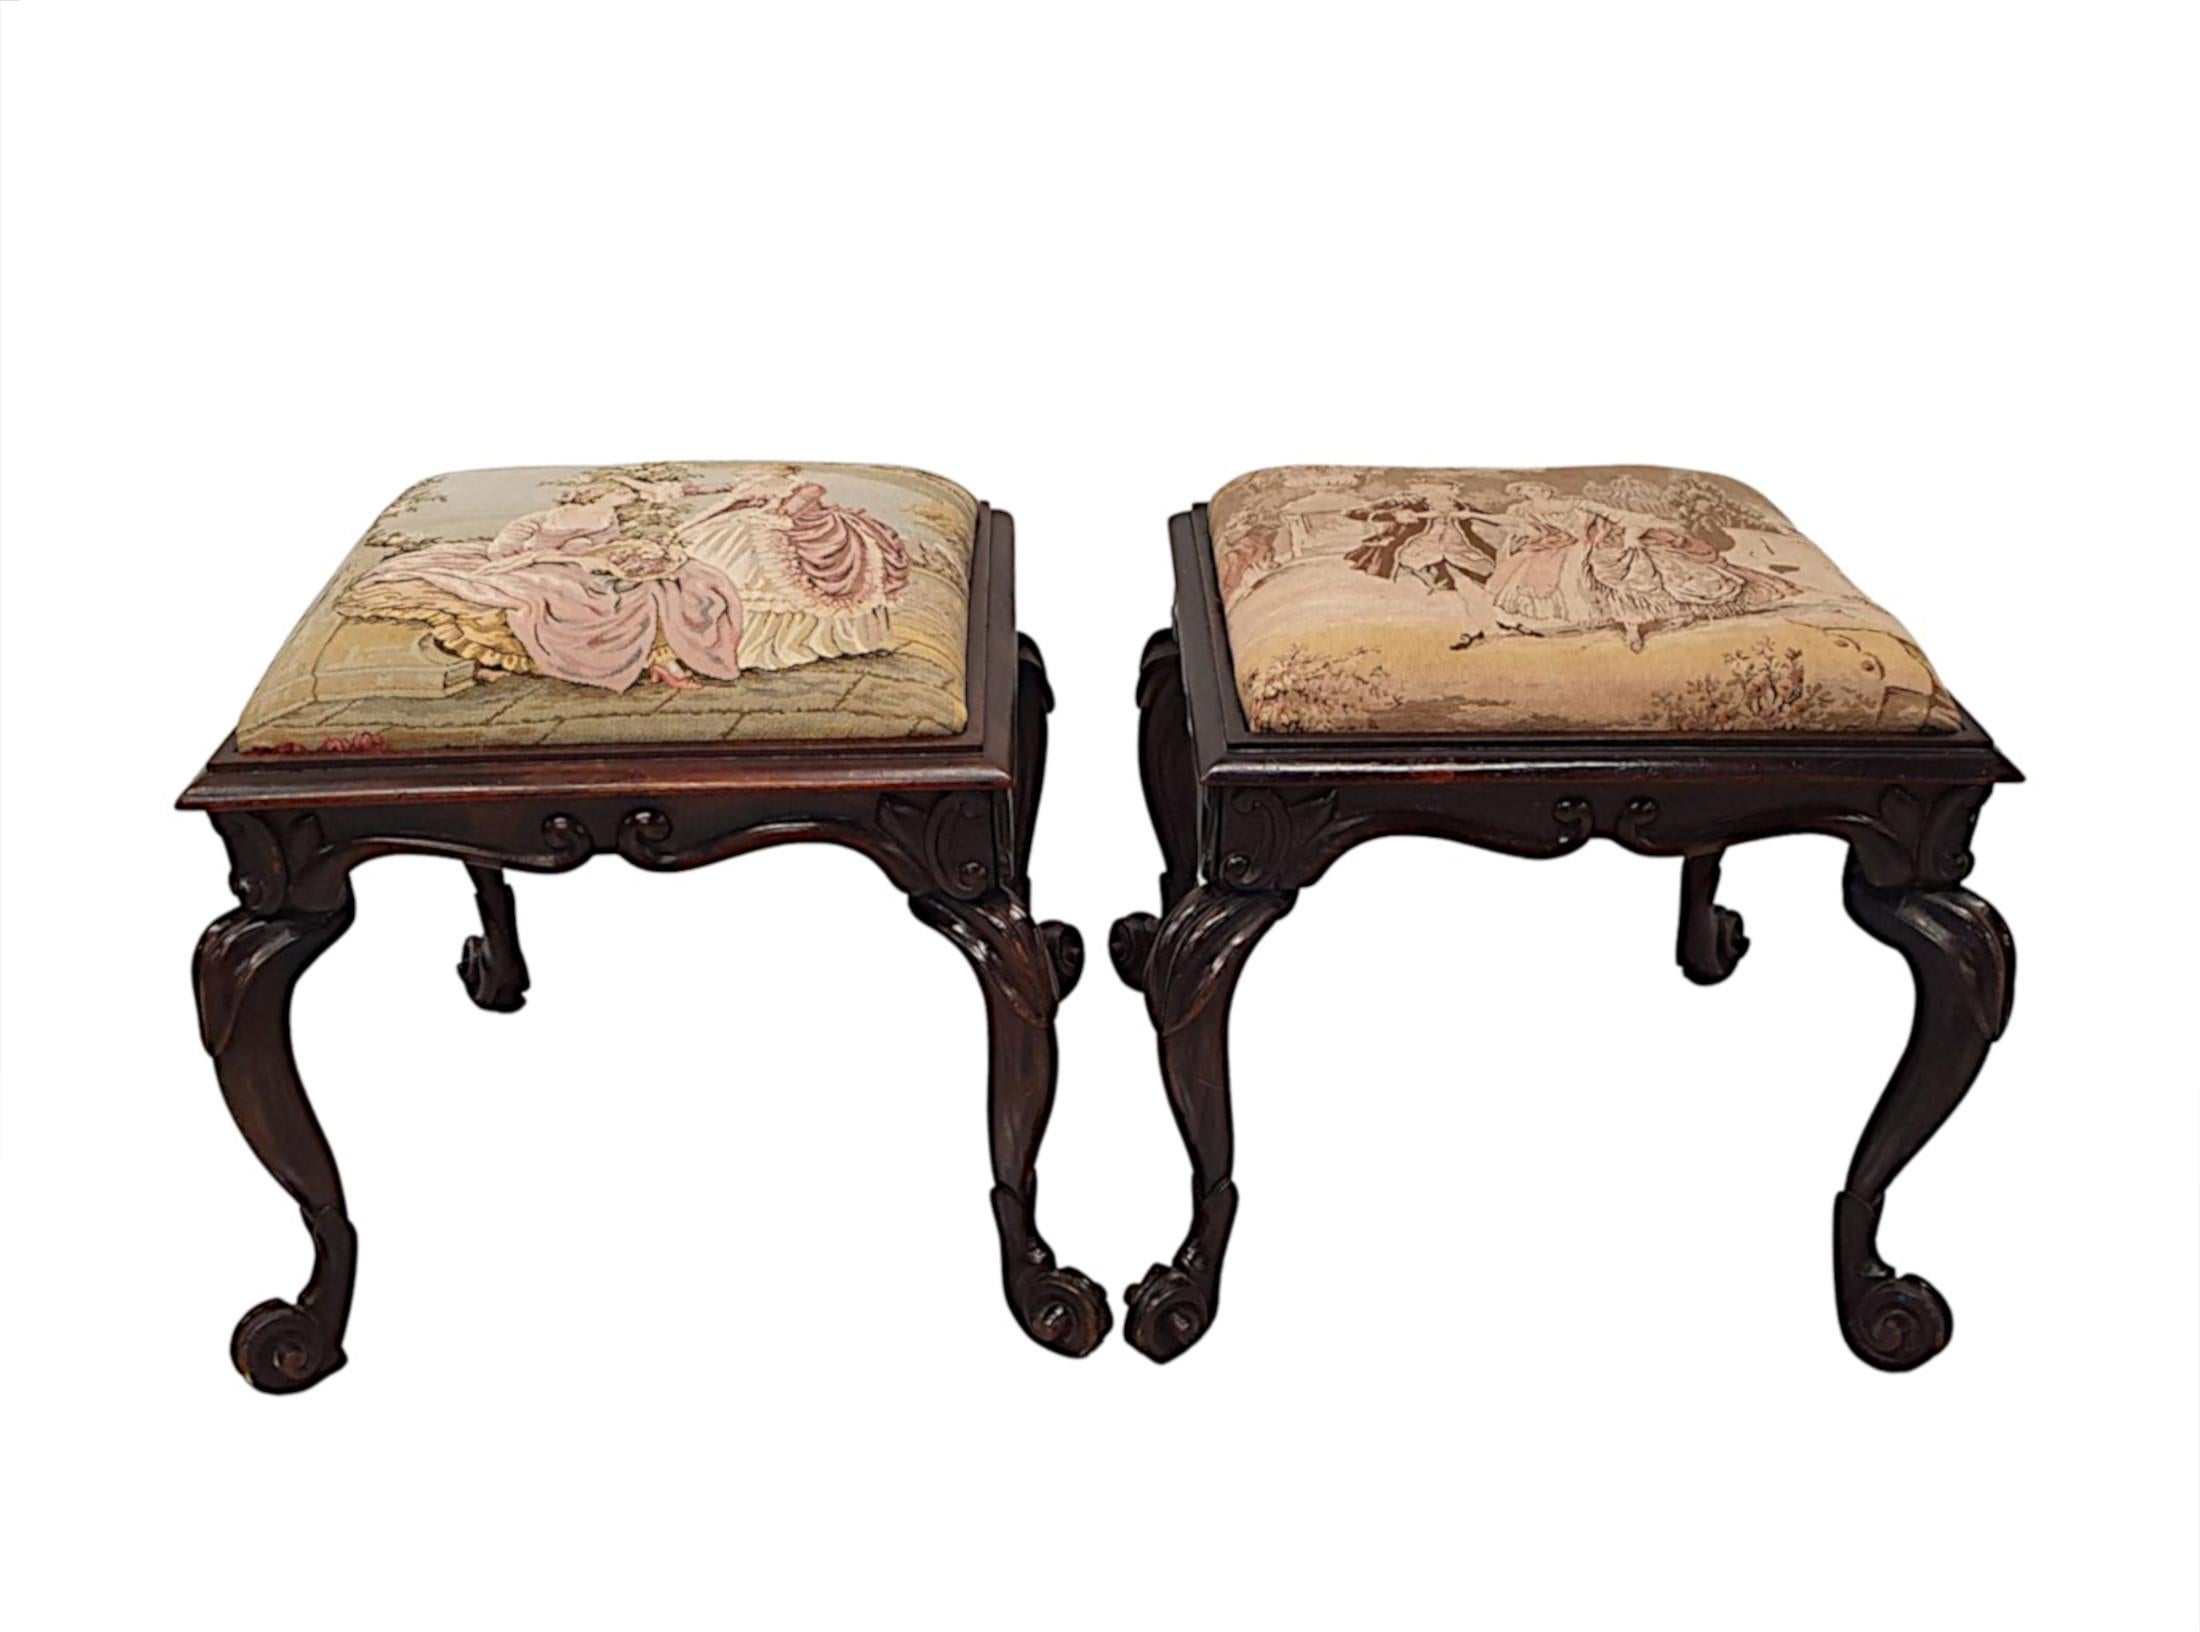 English A Stunning Pair of 19th Century Stools For Sale